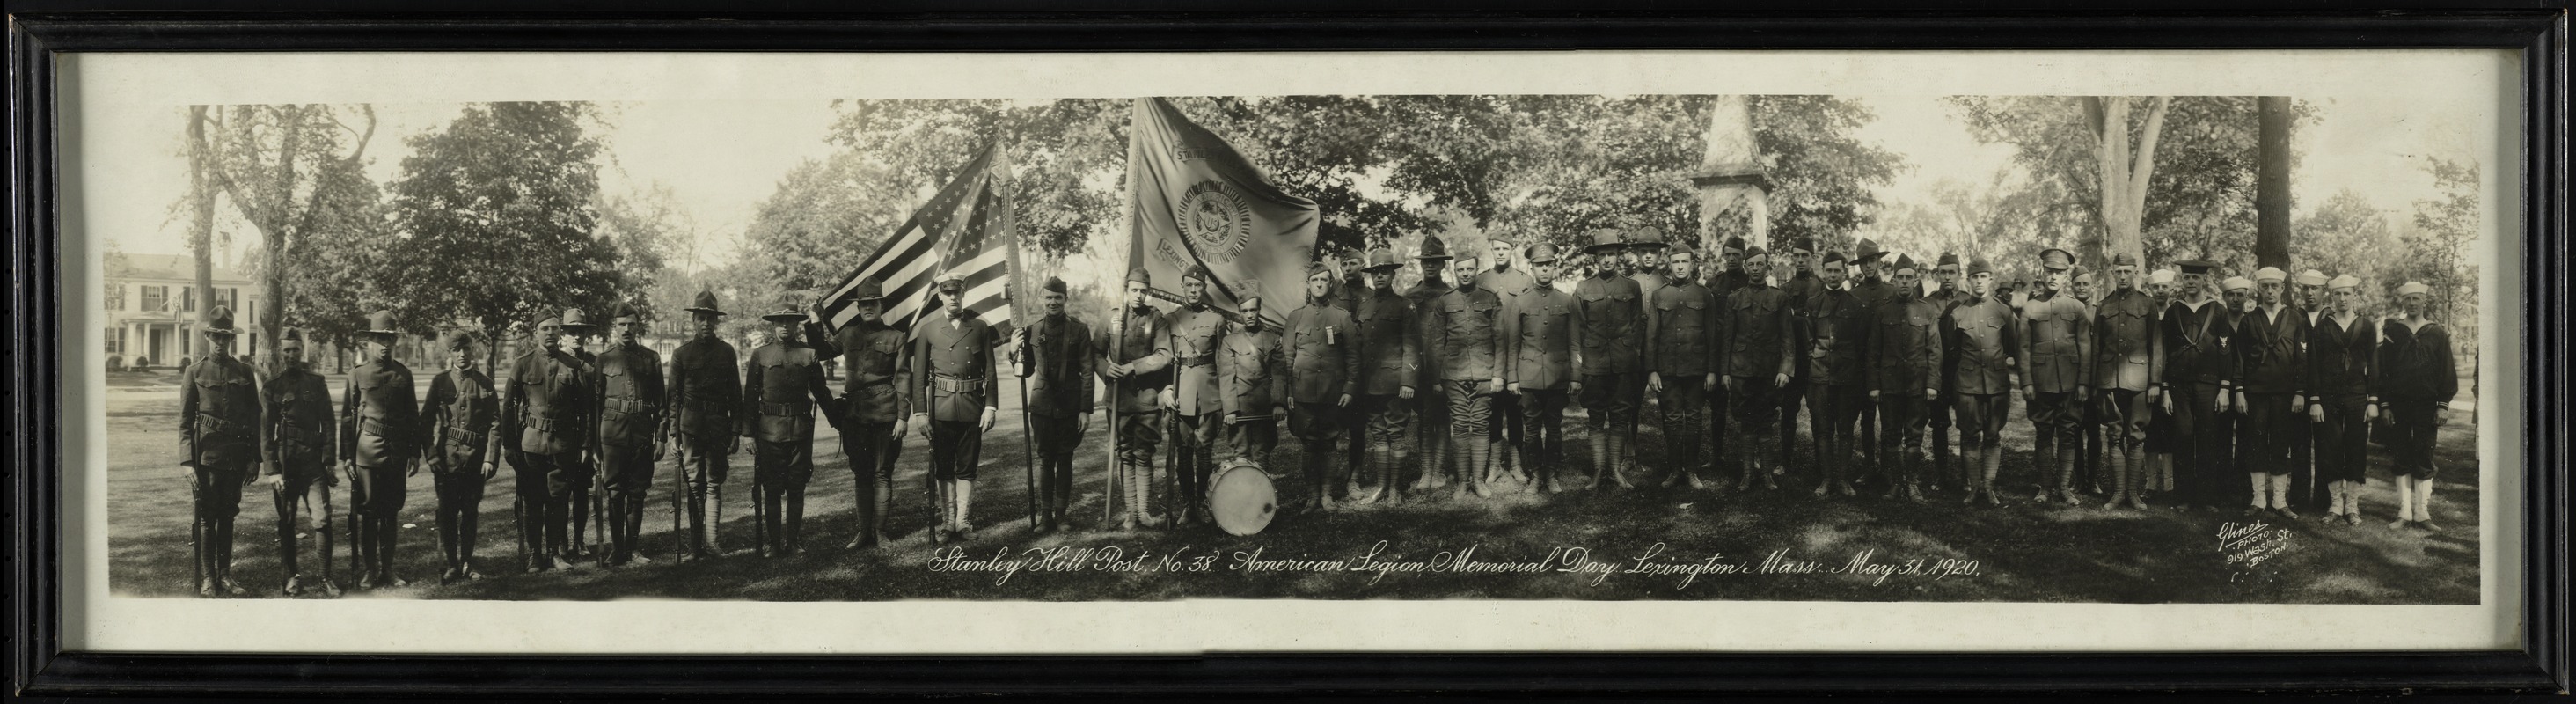 Stanley Hill Post, No. 38. American Legion Memorial Day. Lexington Mass. May 31,1920